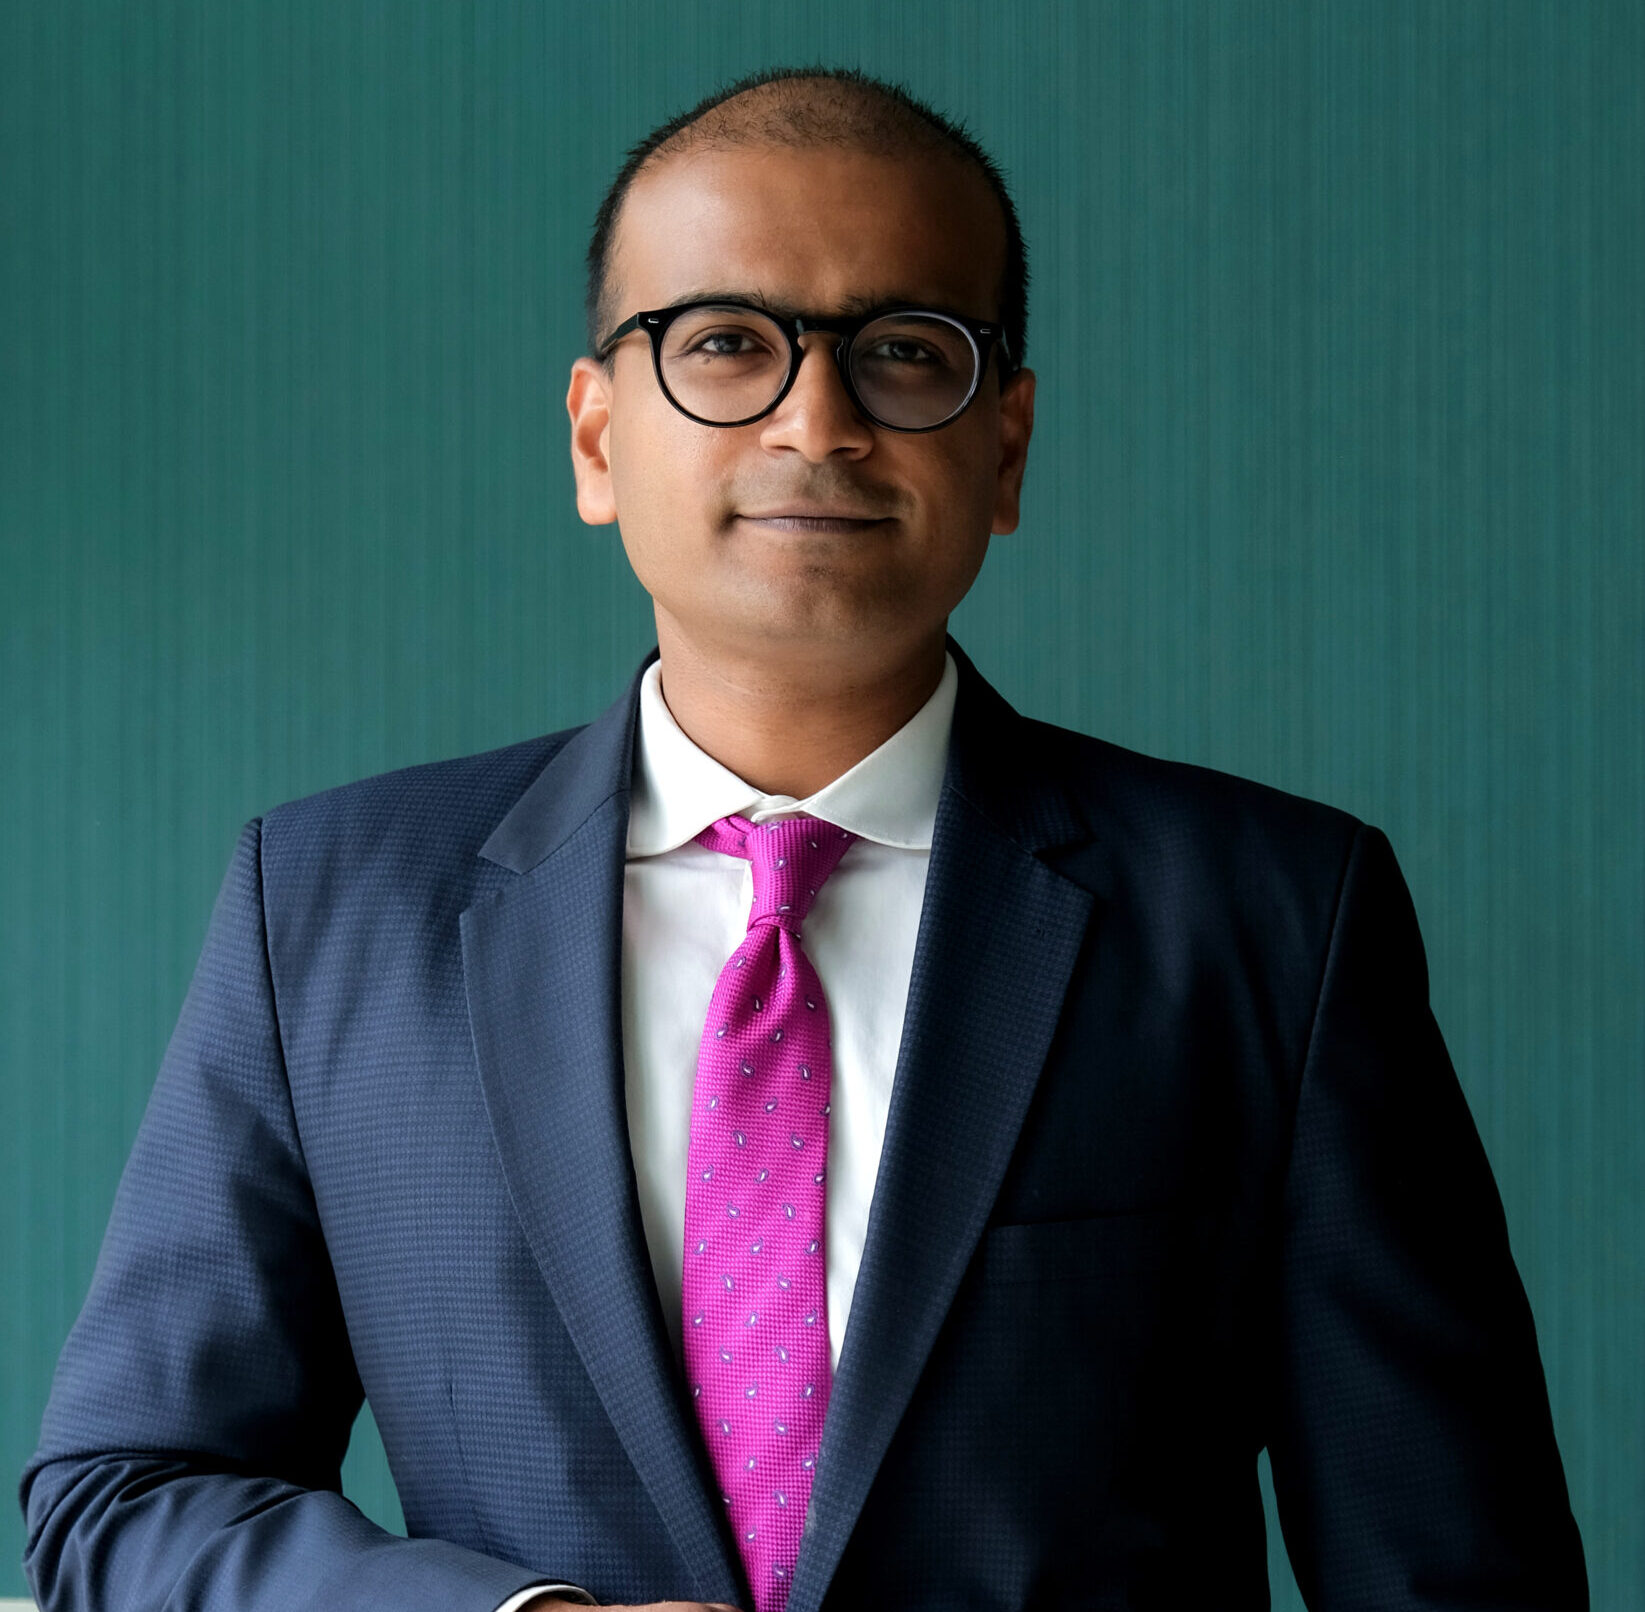 Aloft Bengaluru Outer Ring Road appoints Srikant Kodali as Director of Sales and Marketing